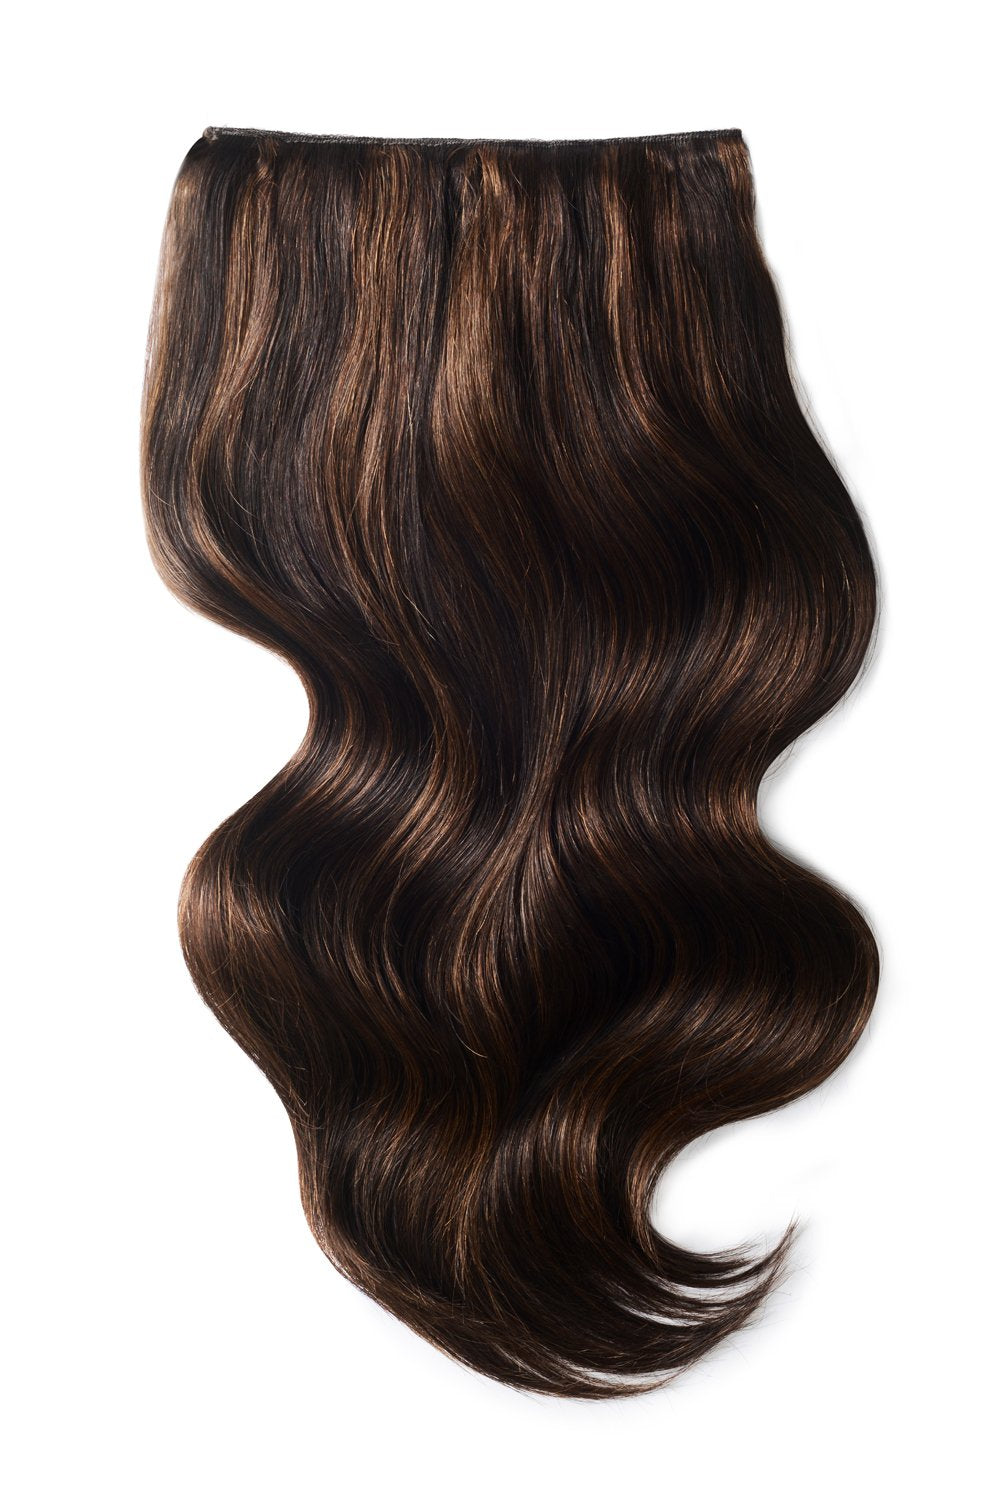 Double Wefted Full Head Remy Clip in Human Hair Extensions - Brown Mix (#2/6)